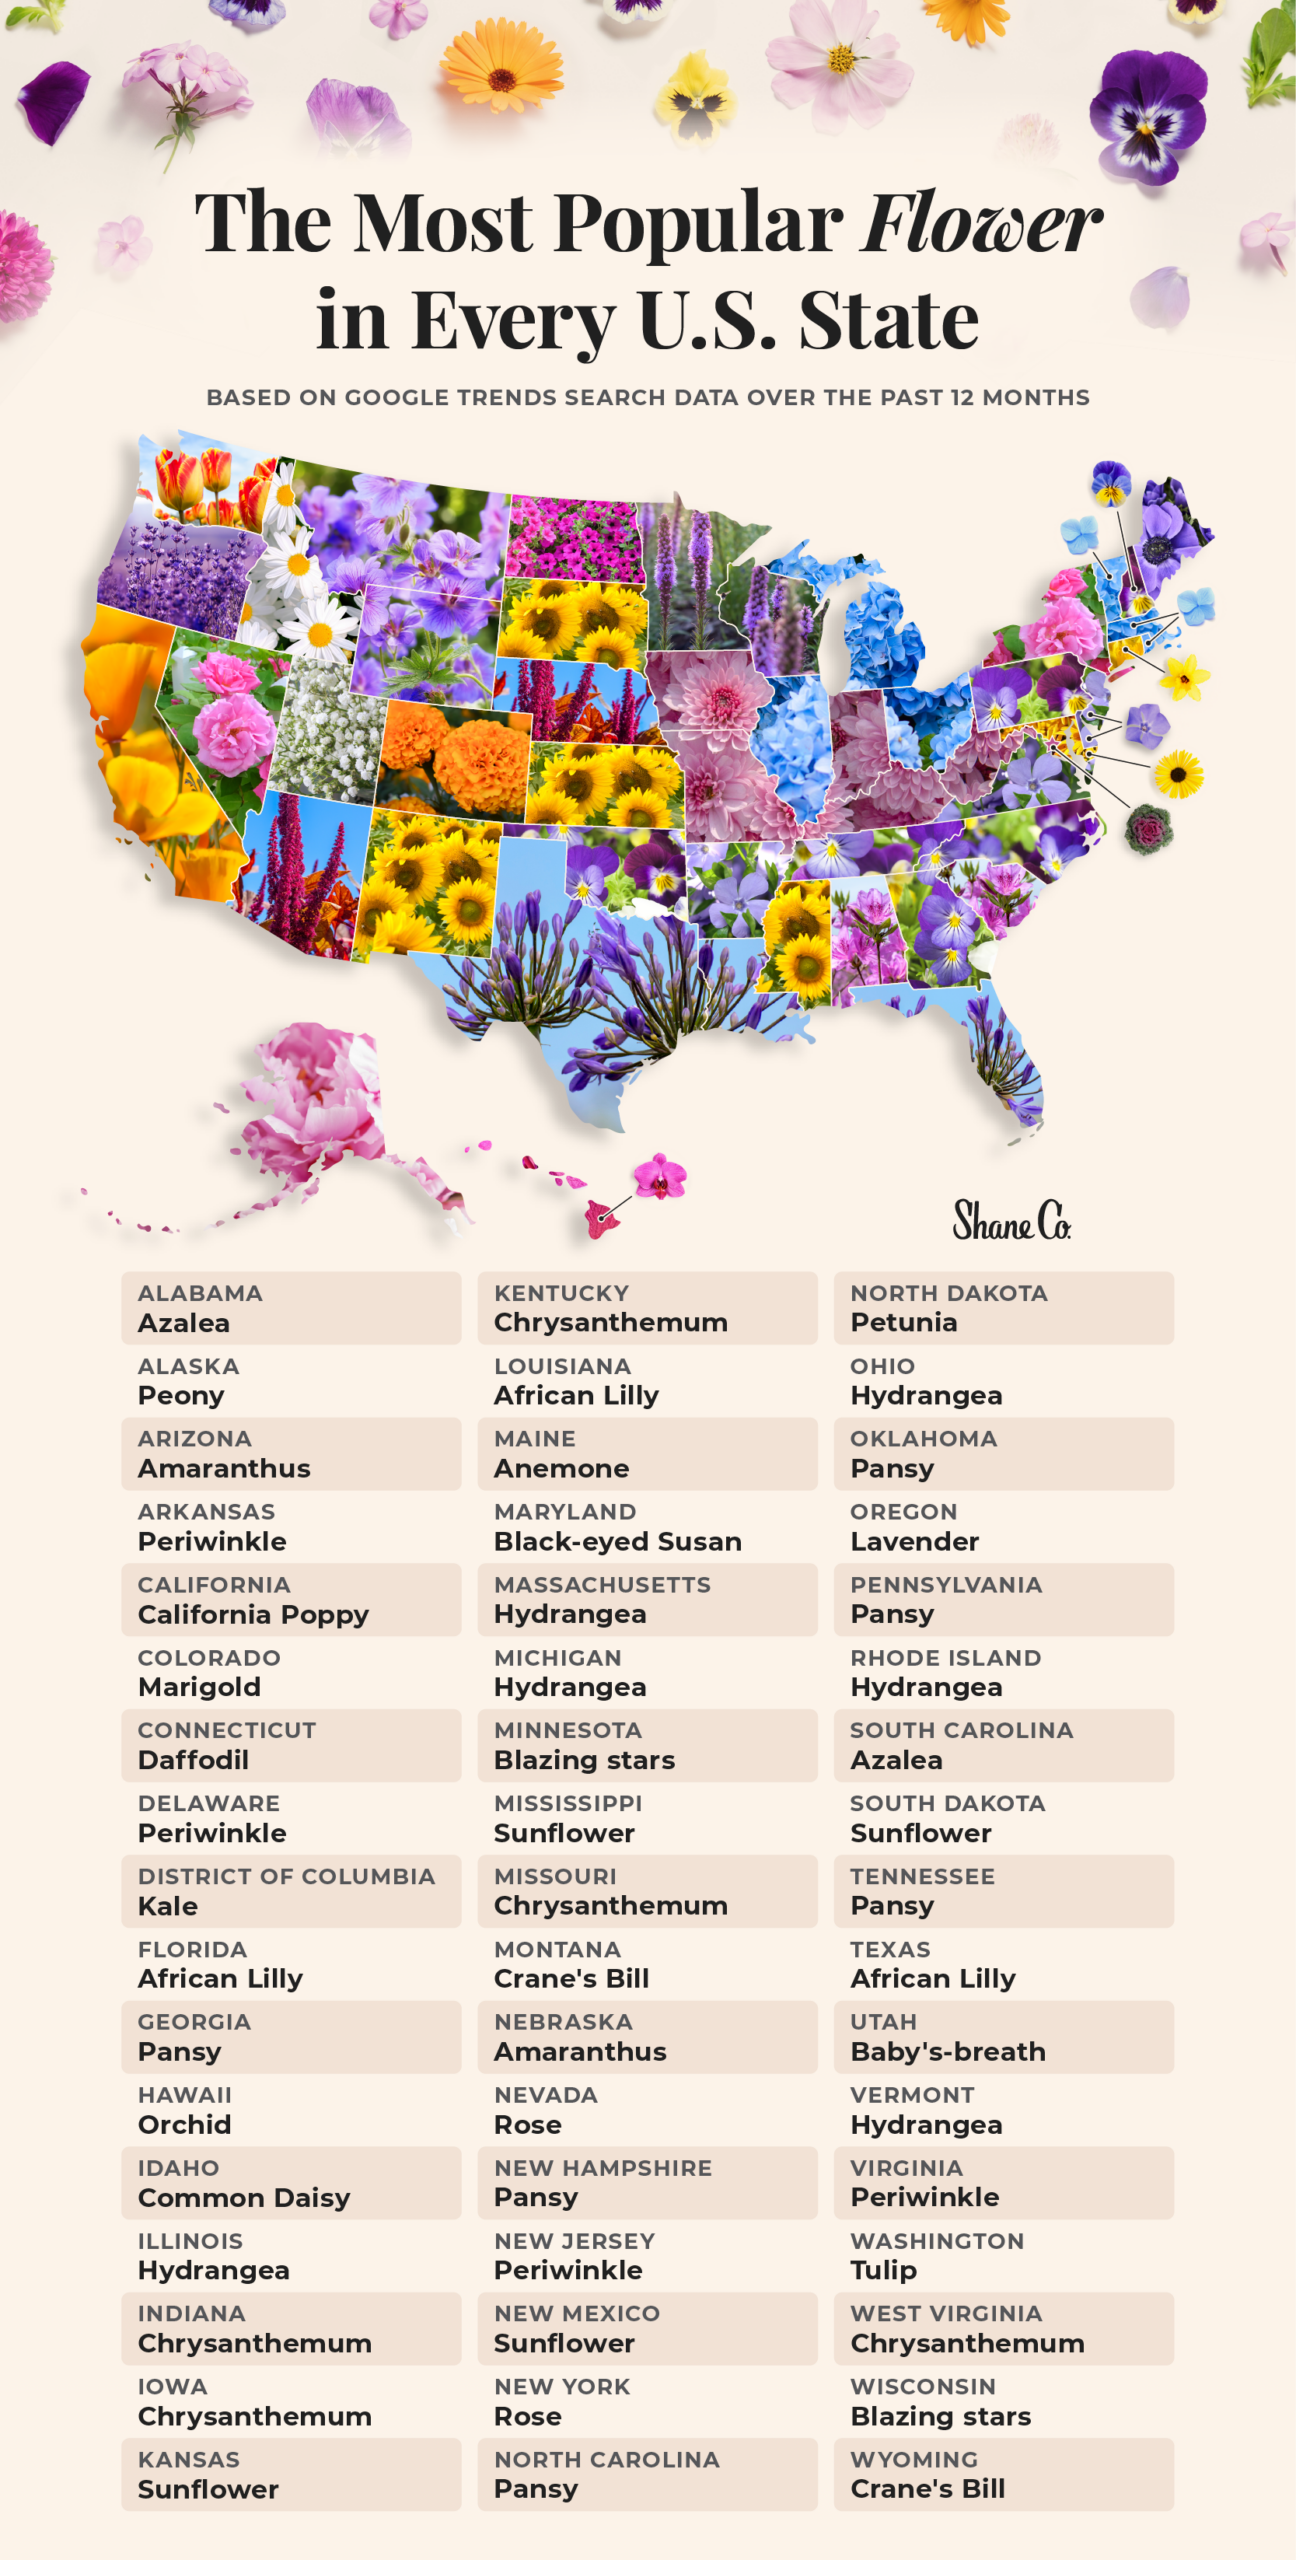 A U.S. map showing the most popular flower in every U.S. state